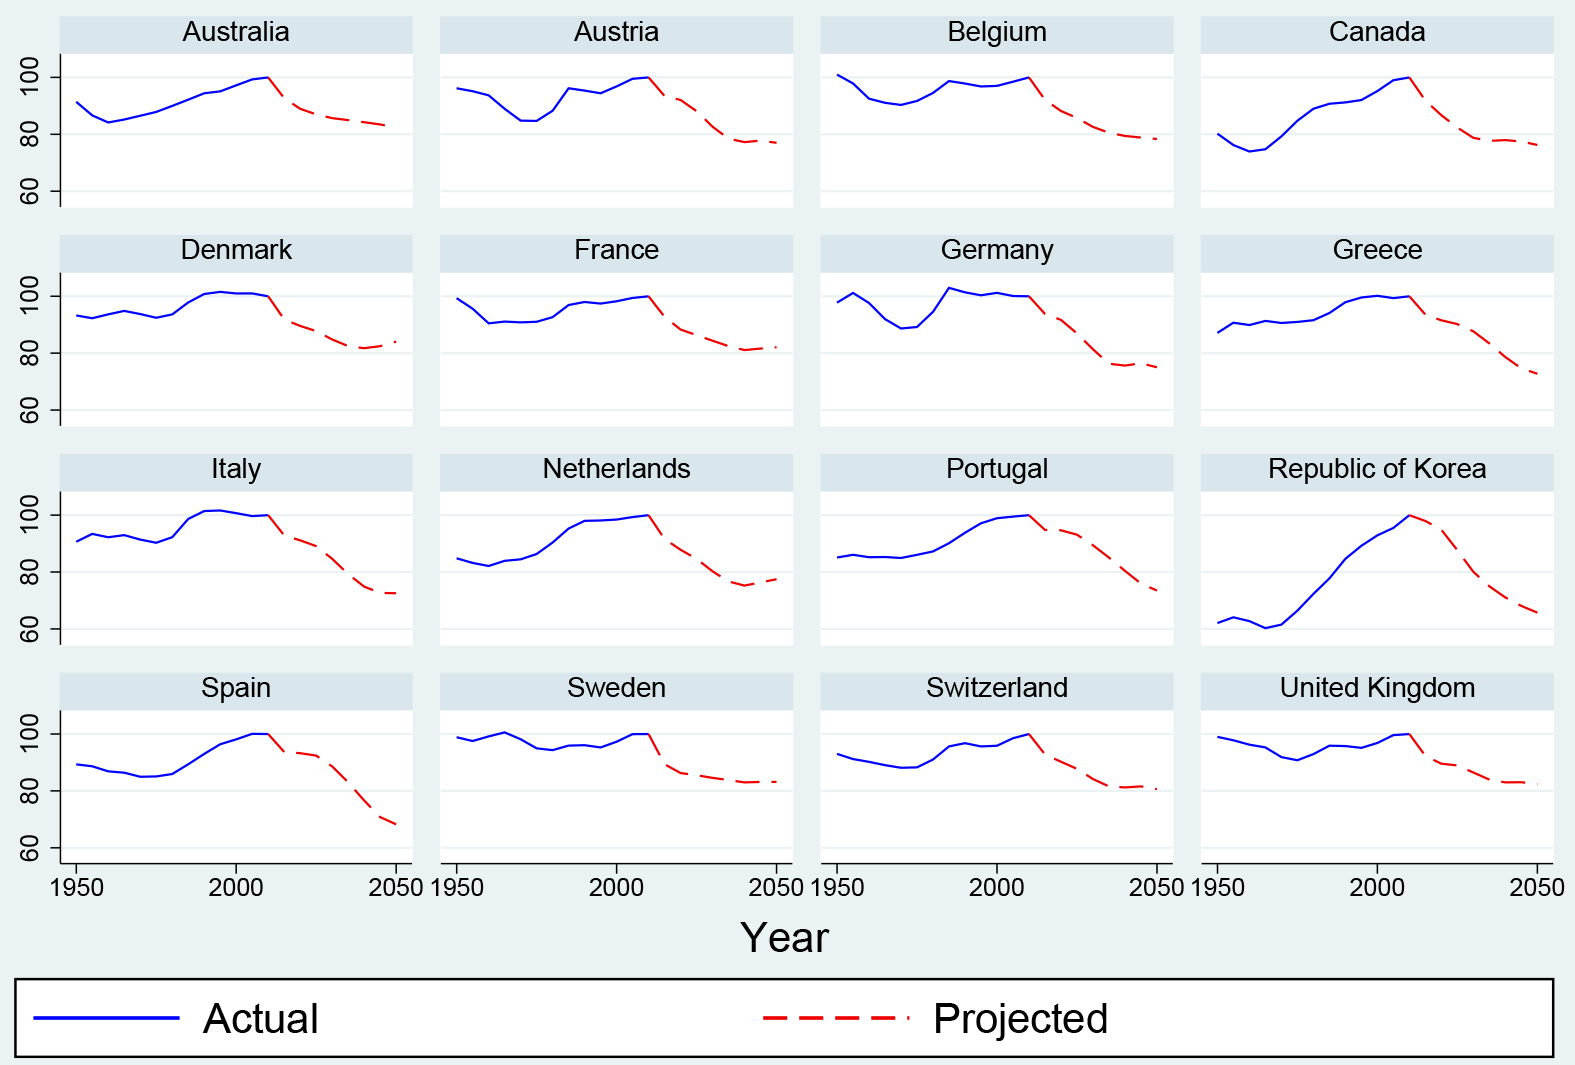 Figure 6: Contributions of Demography on GDP Level (OECD Countries). See accessible link for data.